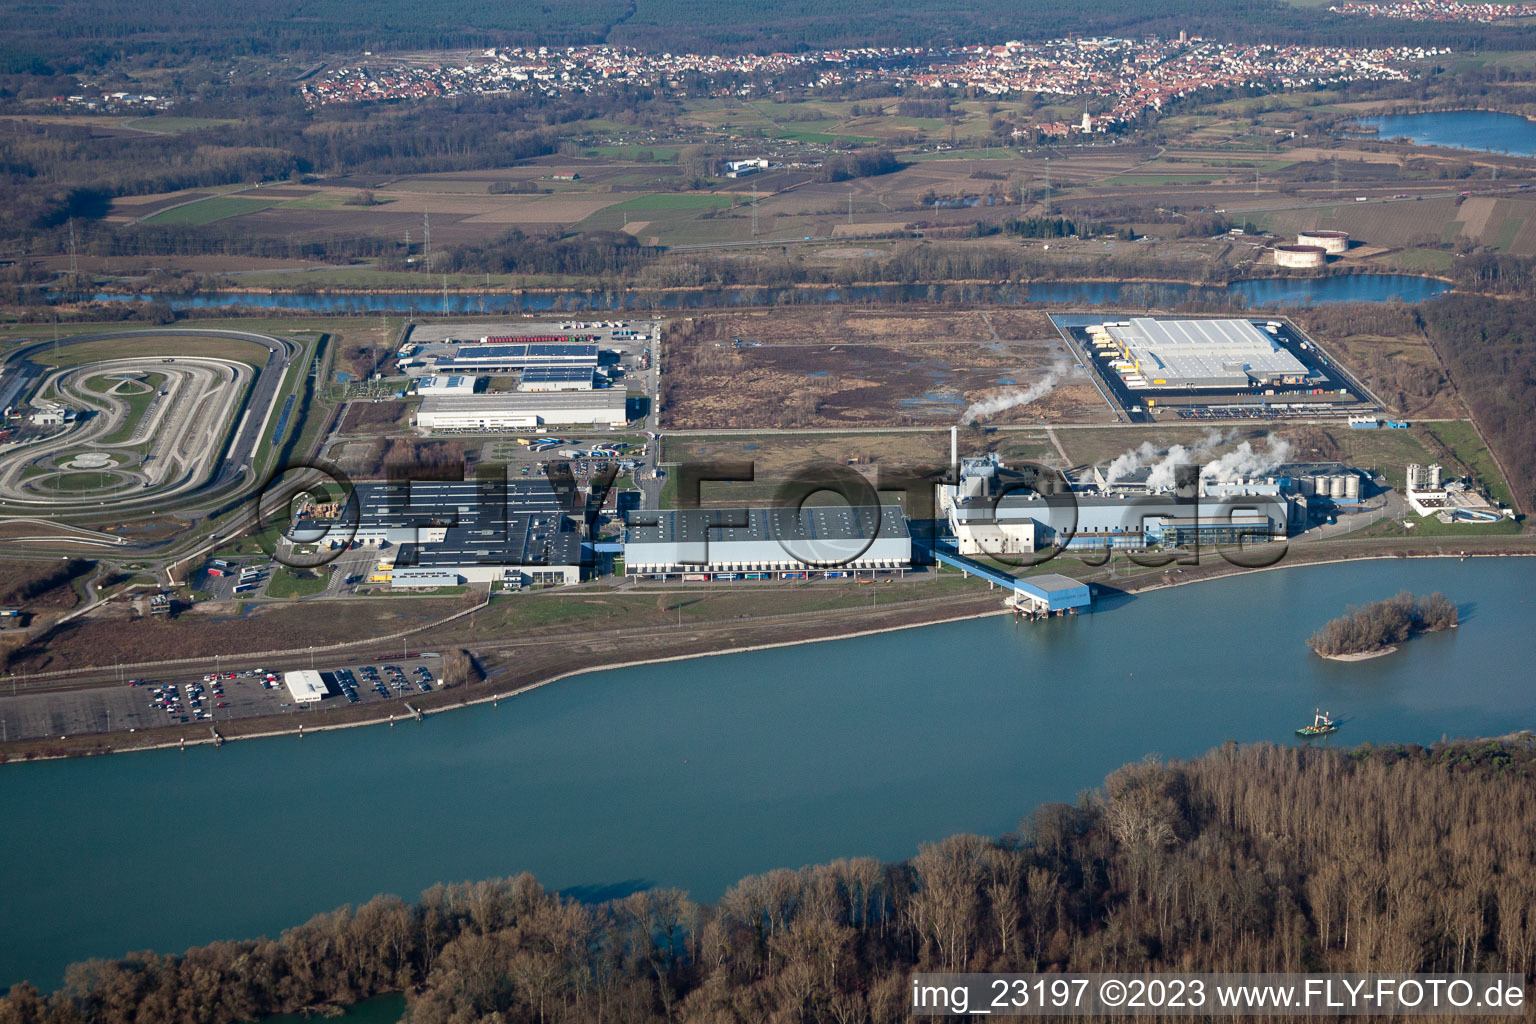 Building and production halls on the premises of Papierfabrik Palm GmbH & Co. KG in the district Industriegebiet Woerth-Oberwald in Woerth am Rhein in the state Rhineland-Palatinate